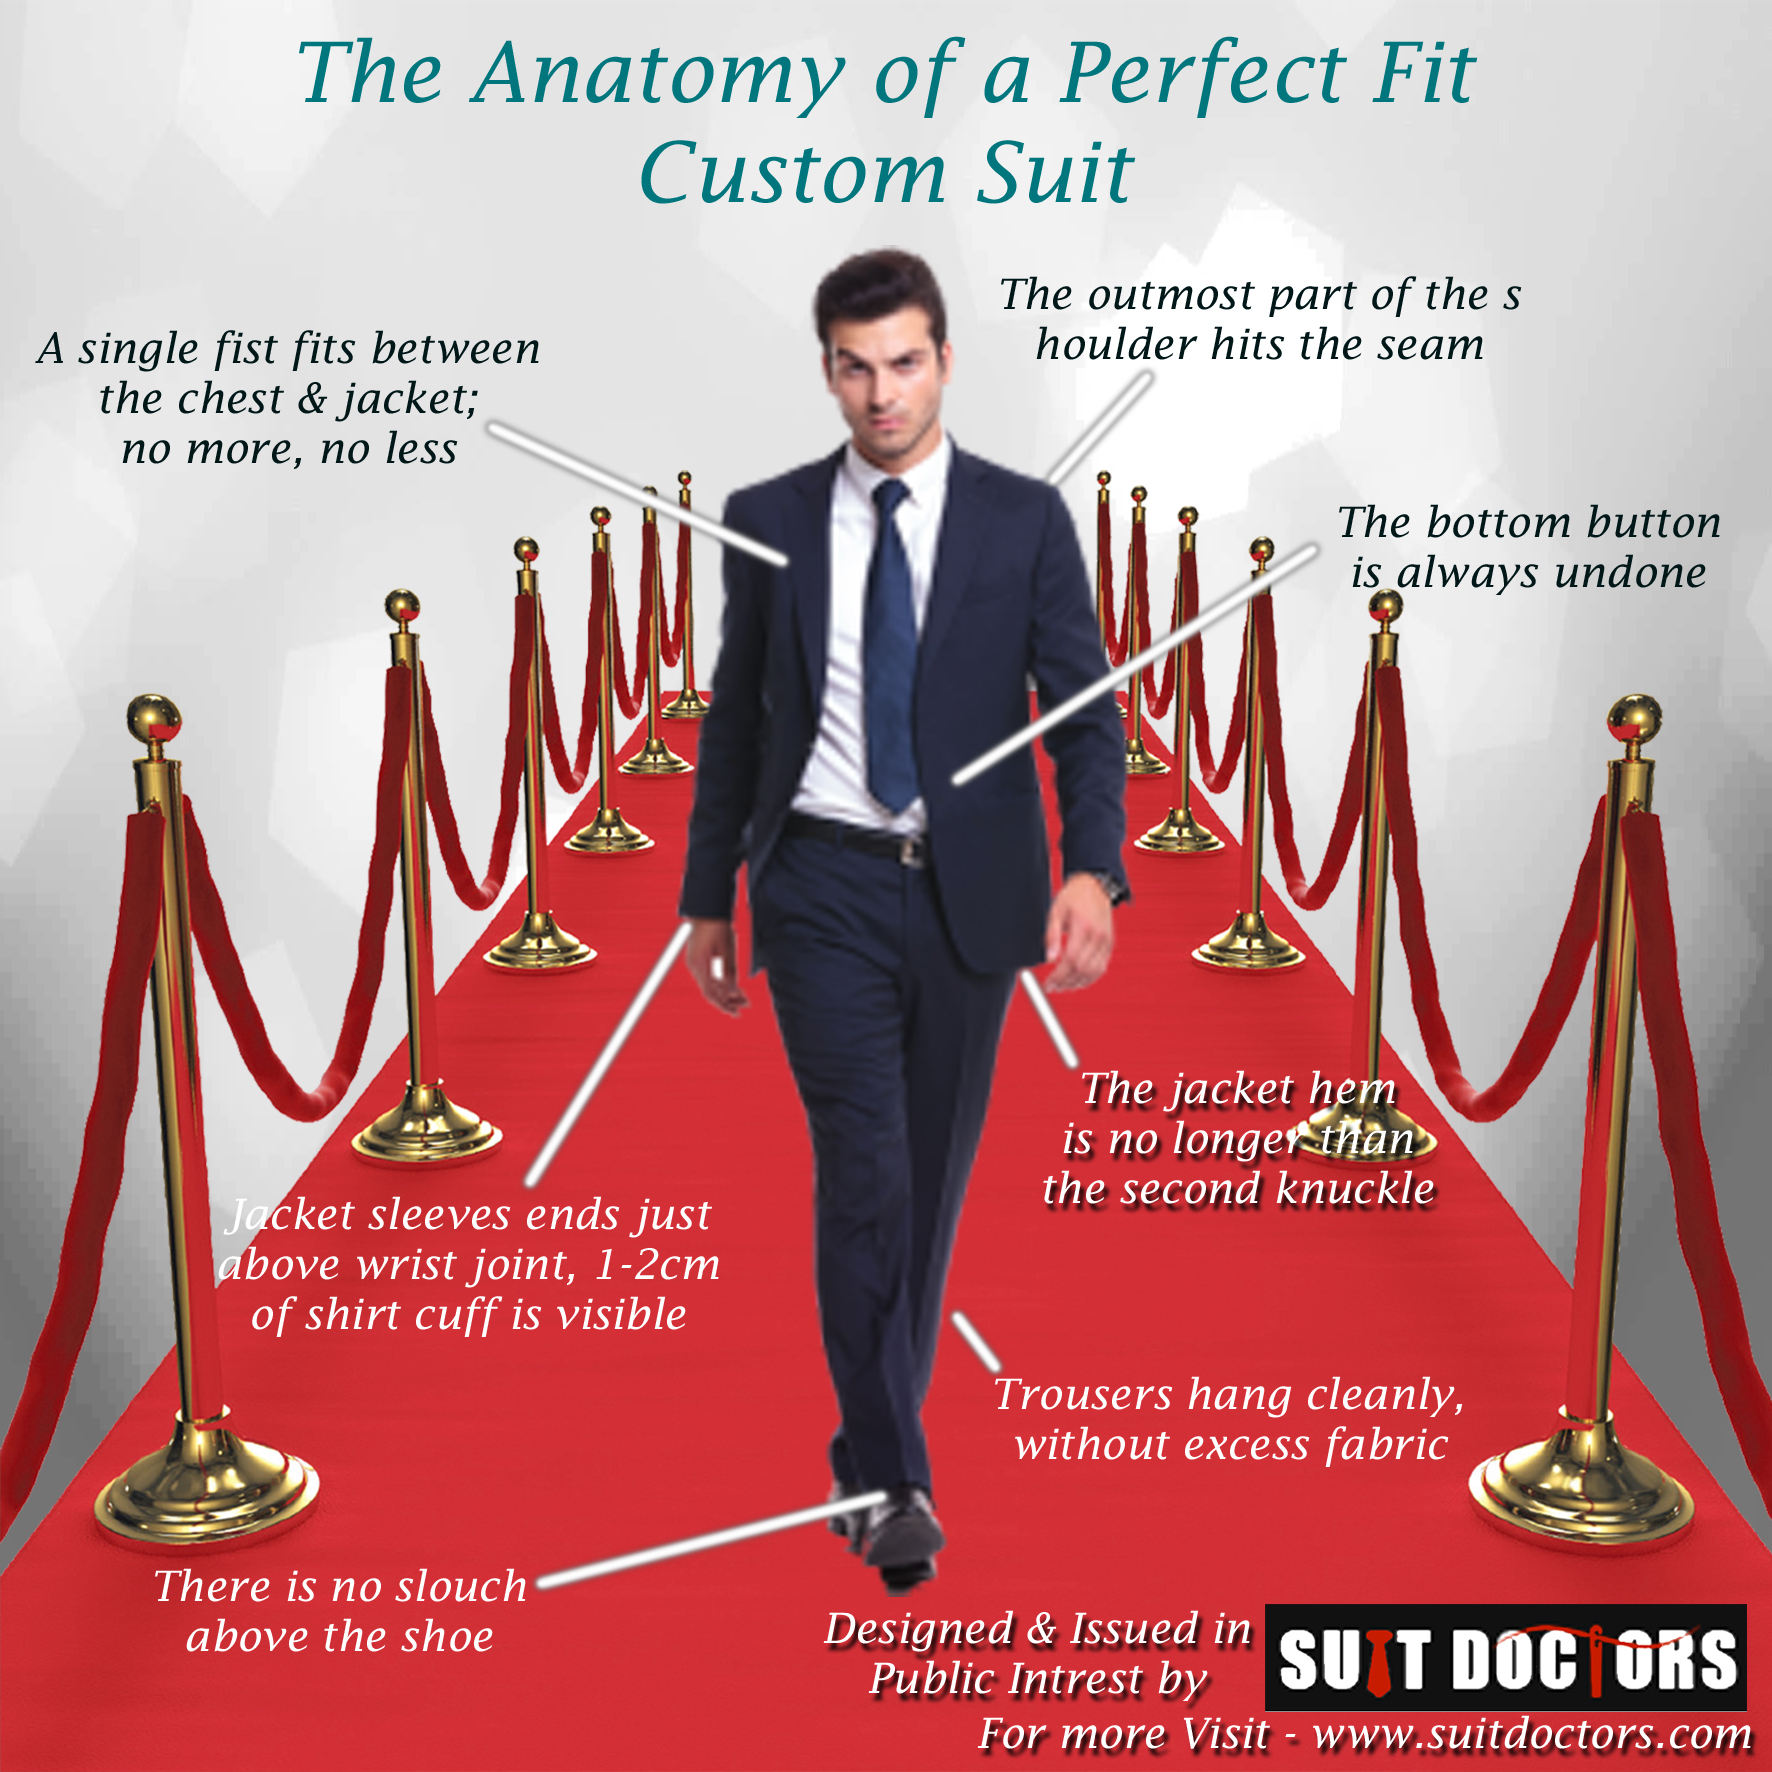 The Anatomy of a Perfect Fit Custom Suit